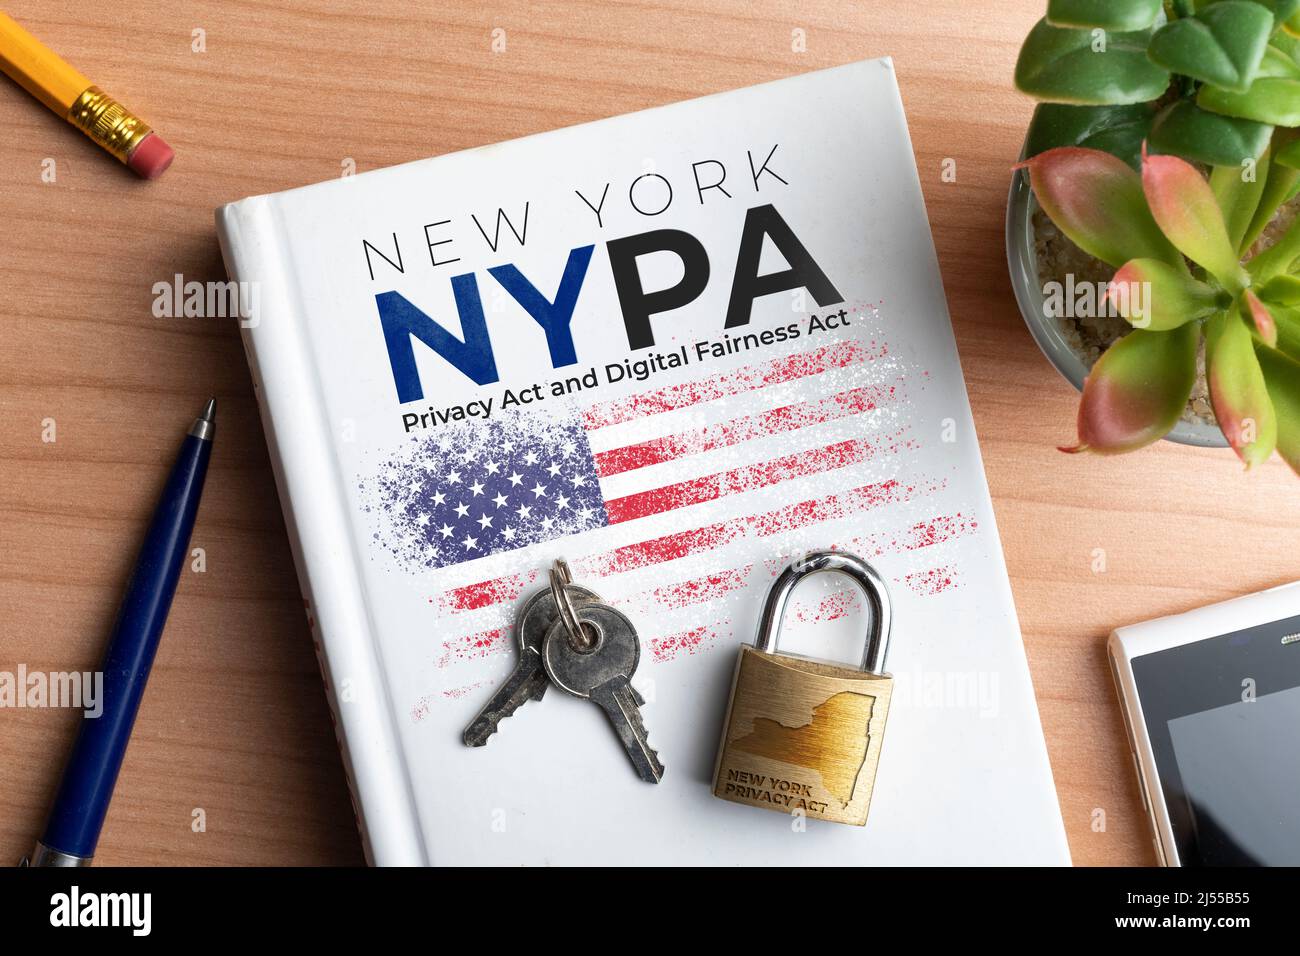 NYPA (new york privacy act) concept: book cover with a lock and some keys and text for the New York Privacy Act and the Digital Fairness Act Stock Photo